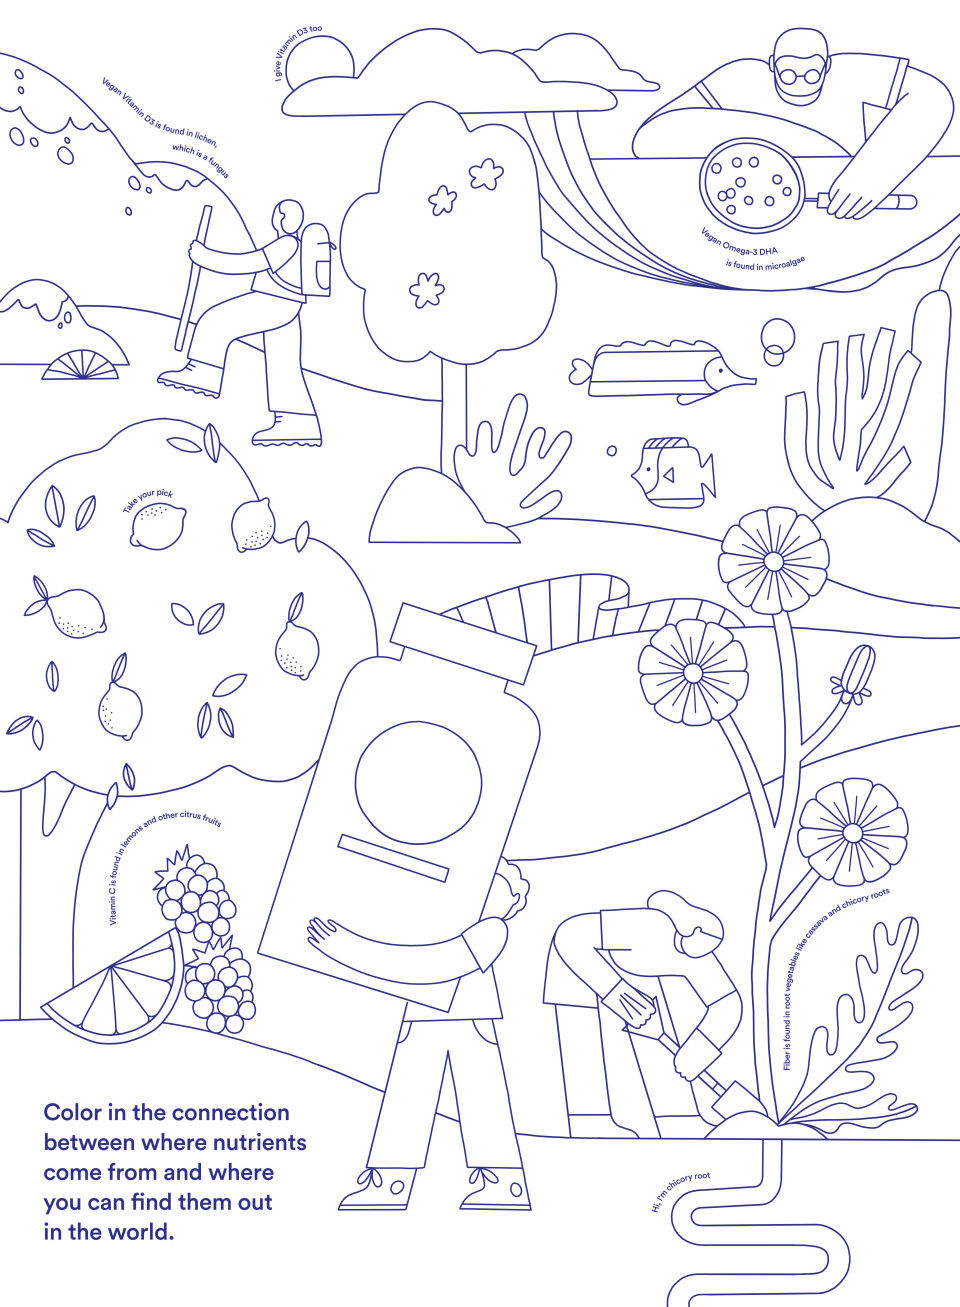 Invite your kids to trace where their nutrients come from with this fun coloring activity.